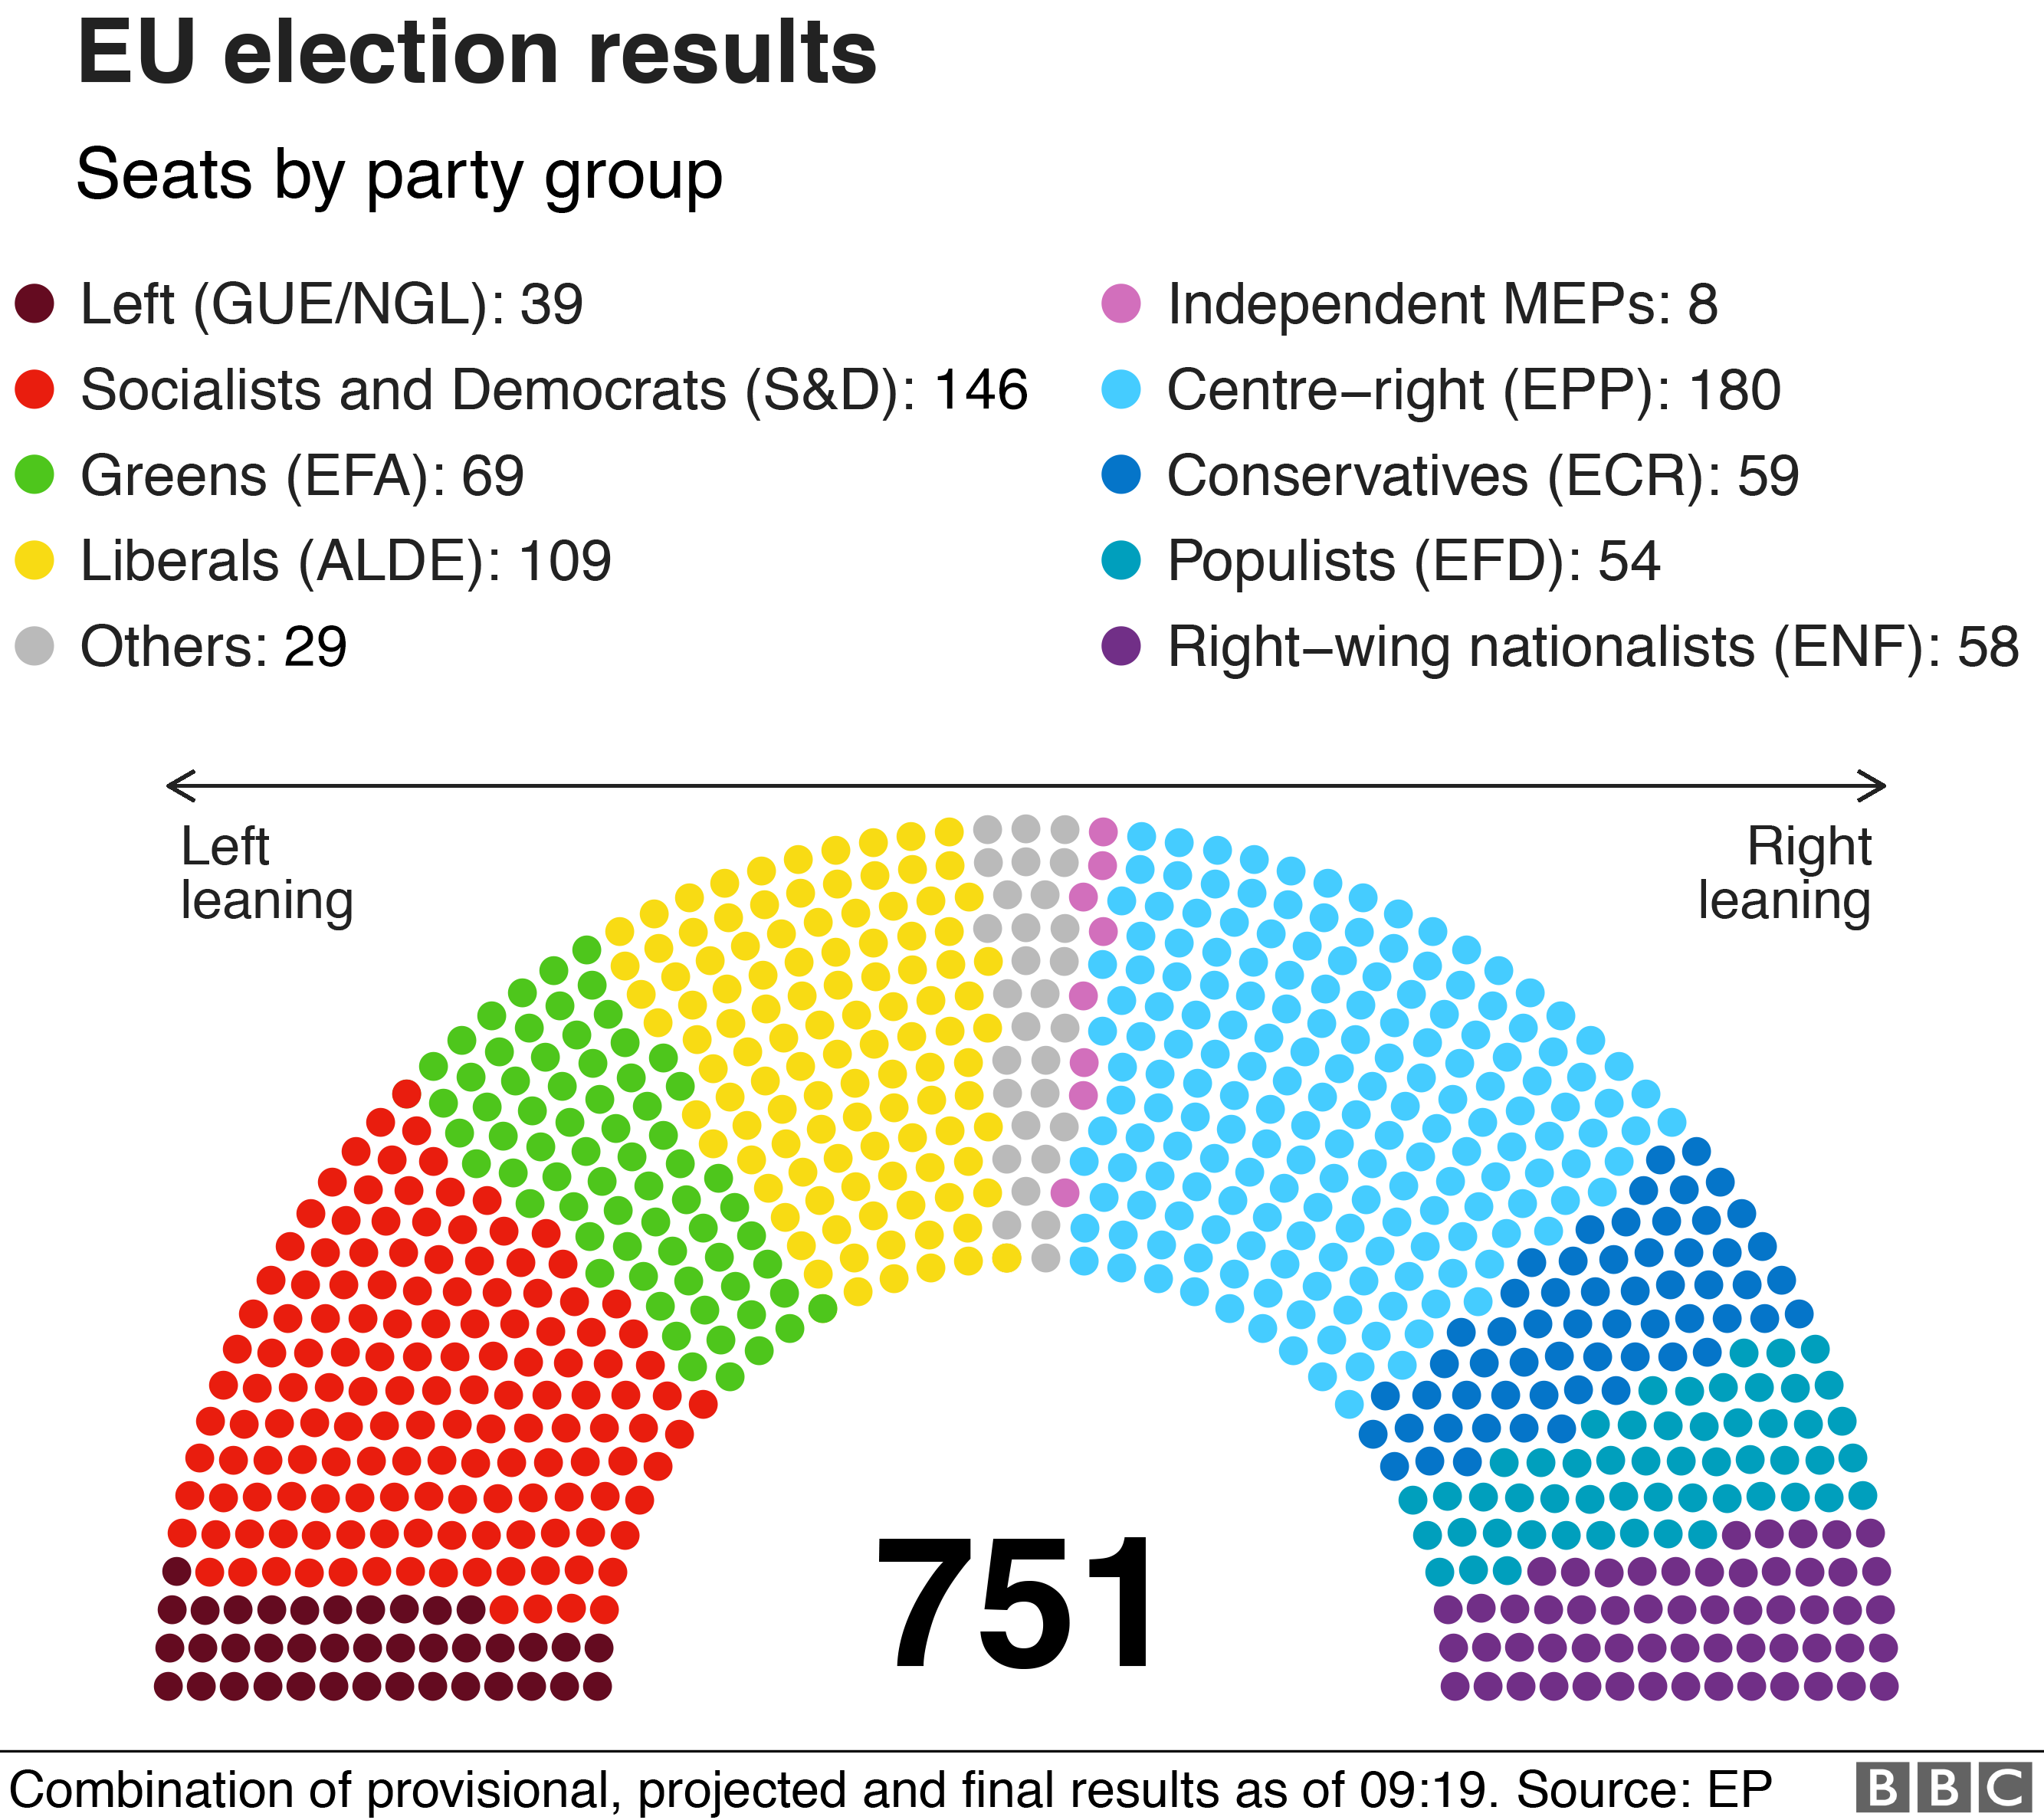 Results by party group. EPP largest with 180 out of 751